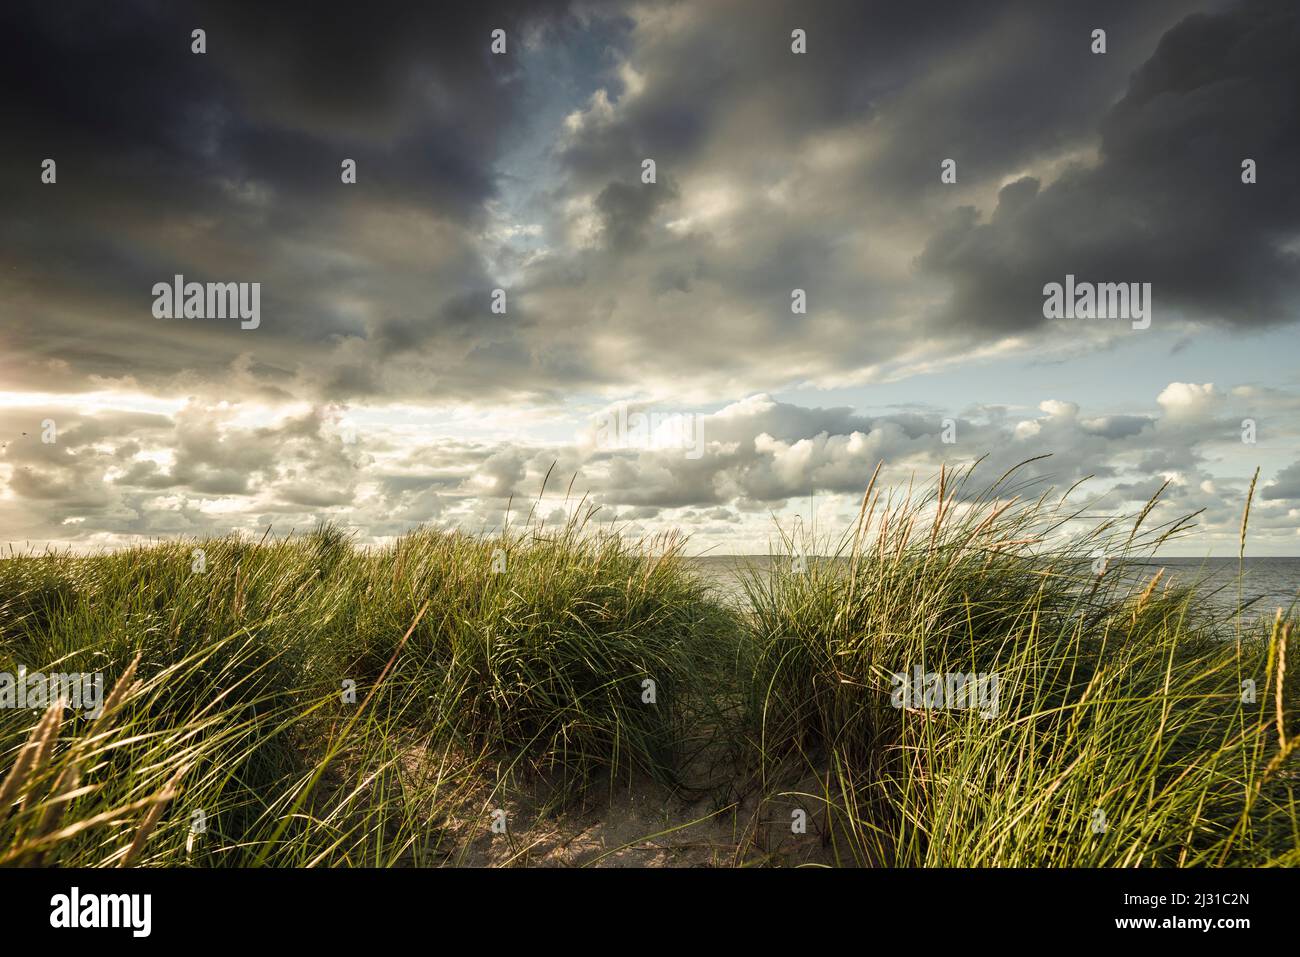 Dune grass and sand dunes under rain clouds at the North Sea, Schillig, Wangerland, Friesland, Lower Saxony, Germany, Europe Stock Photo